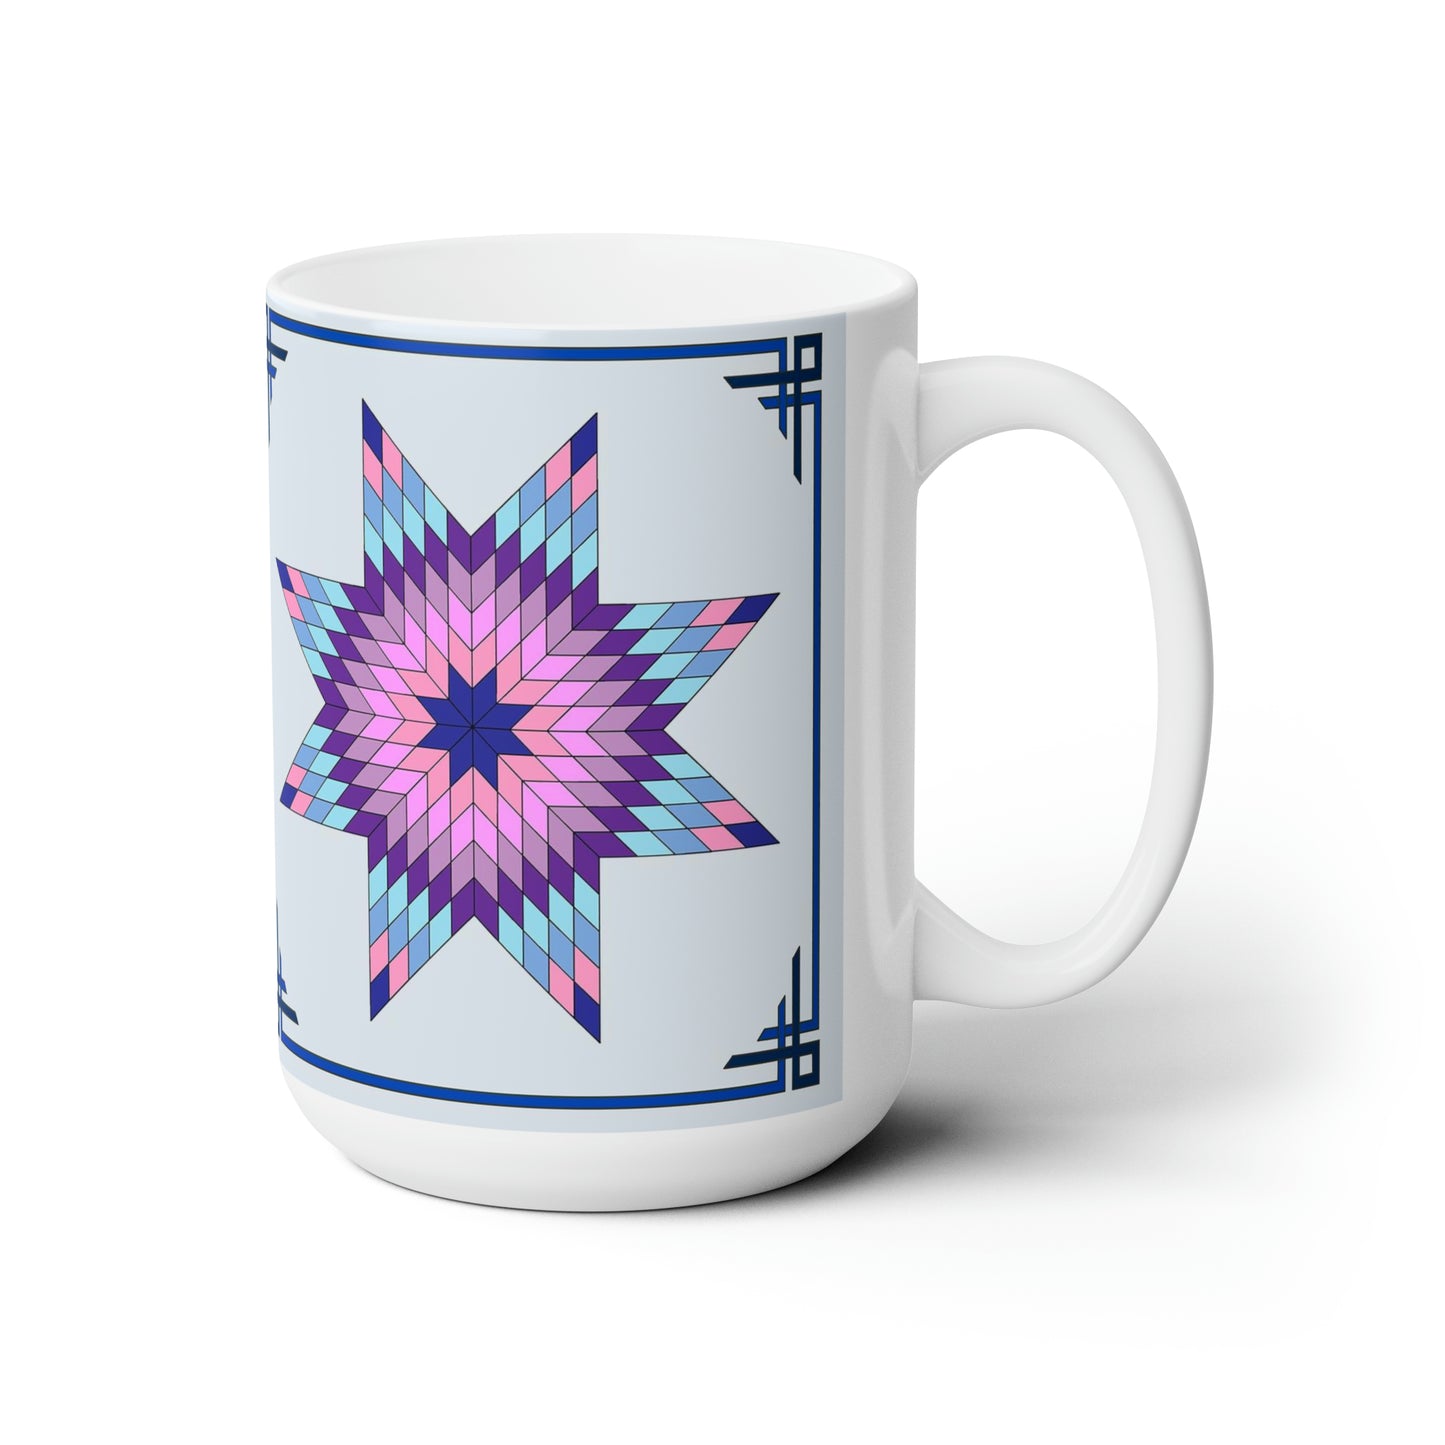 Enjoy a cup of your favorite hot beverage as you plan your new quilting project! The Star of Bethlehem Quilt Design 15 oz. Mug is a reproduction of a fine art design by artist Lee M. Buchanan and has the image on the front and back of the mug. This pattern style is usually listed in the Octogons, Diamonds and 8-Point Star group. If you love to quilt or appreciate the style and craftsmanship involved, this mug will be a favorite part of your quilting enjoyment!